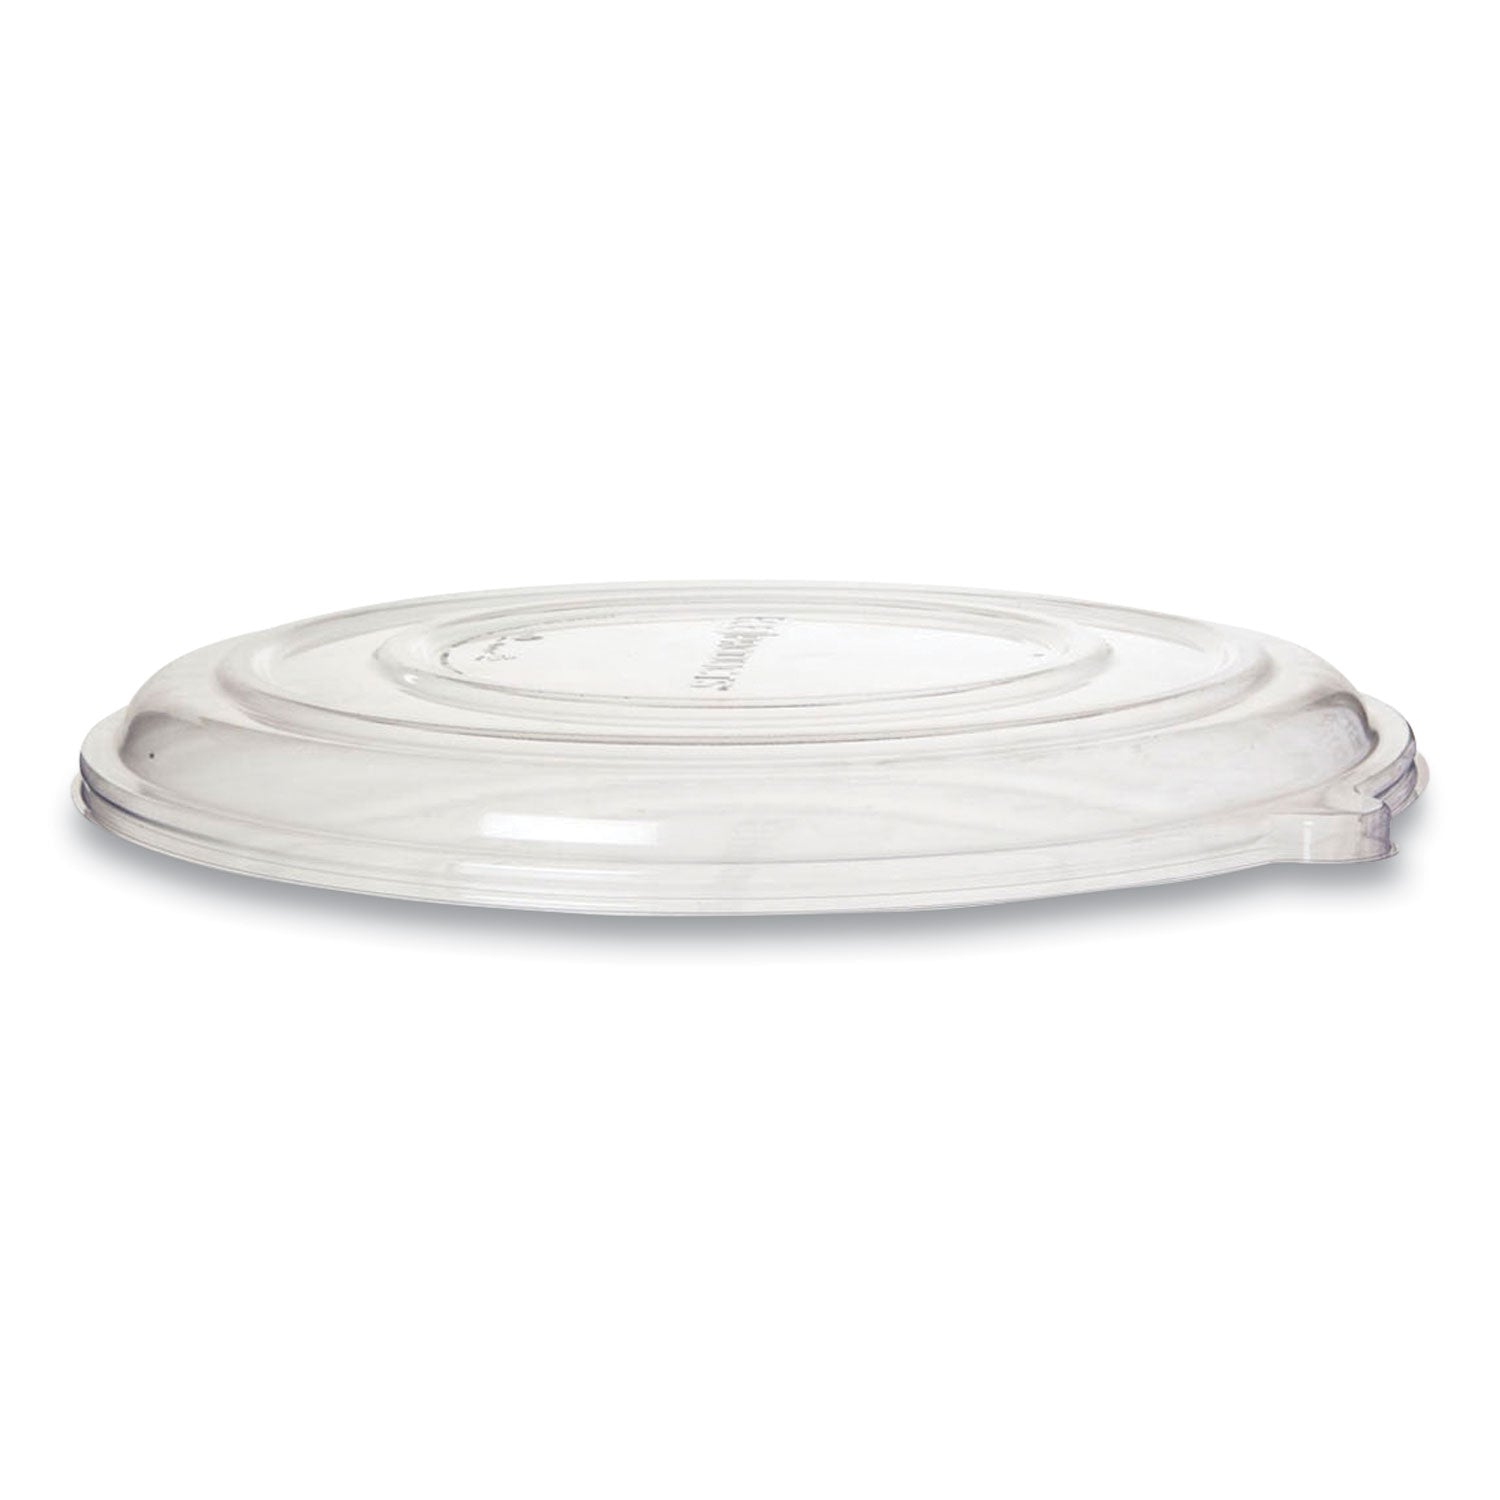 100%-recycled-content-pizza-tray-lids-14-x-14-x-02-clear-plastic-50-carton_ecoepscptr14lid - 1